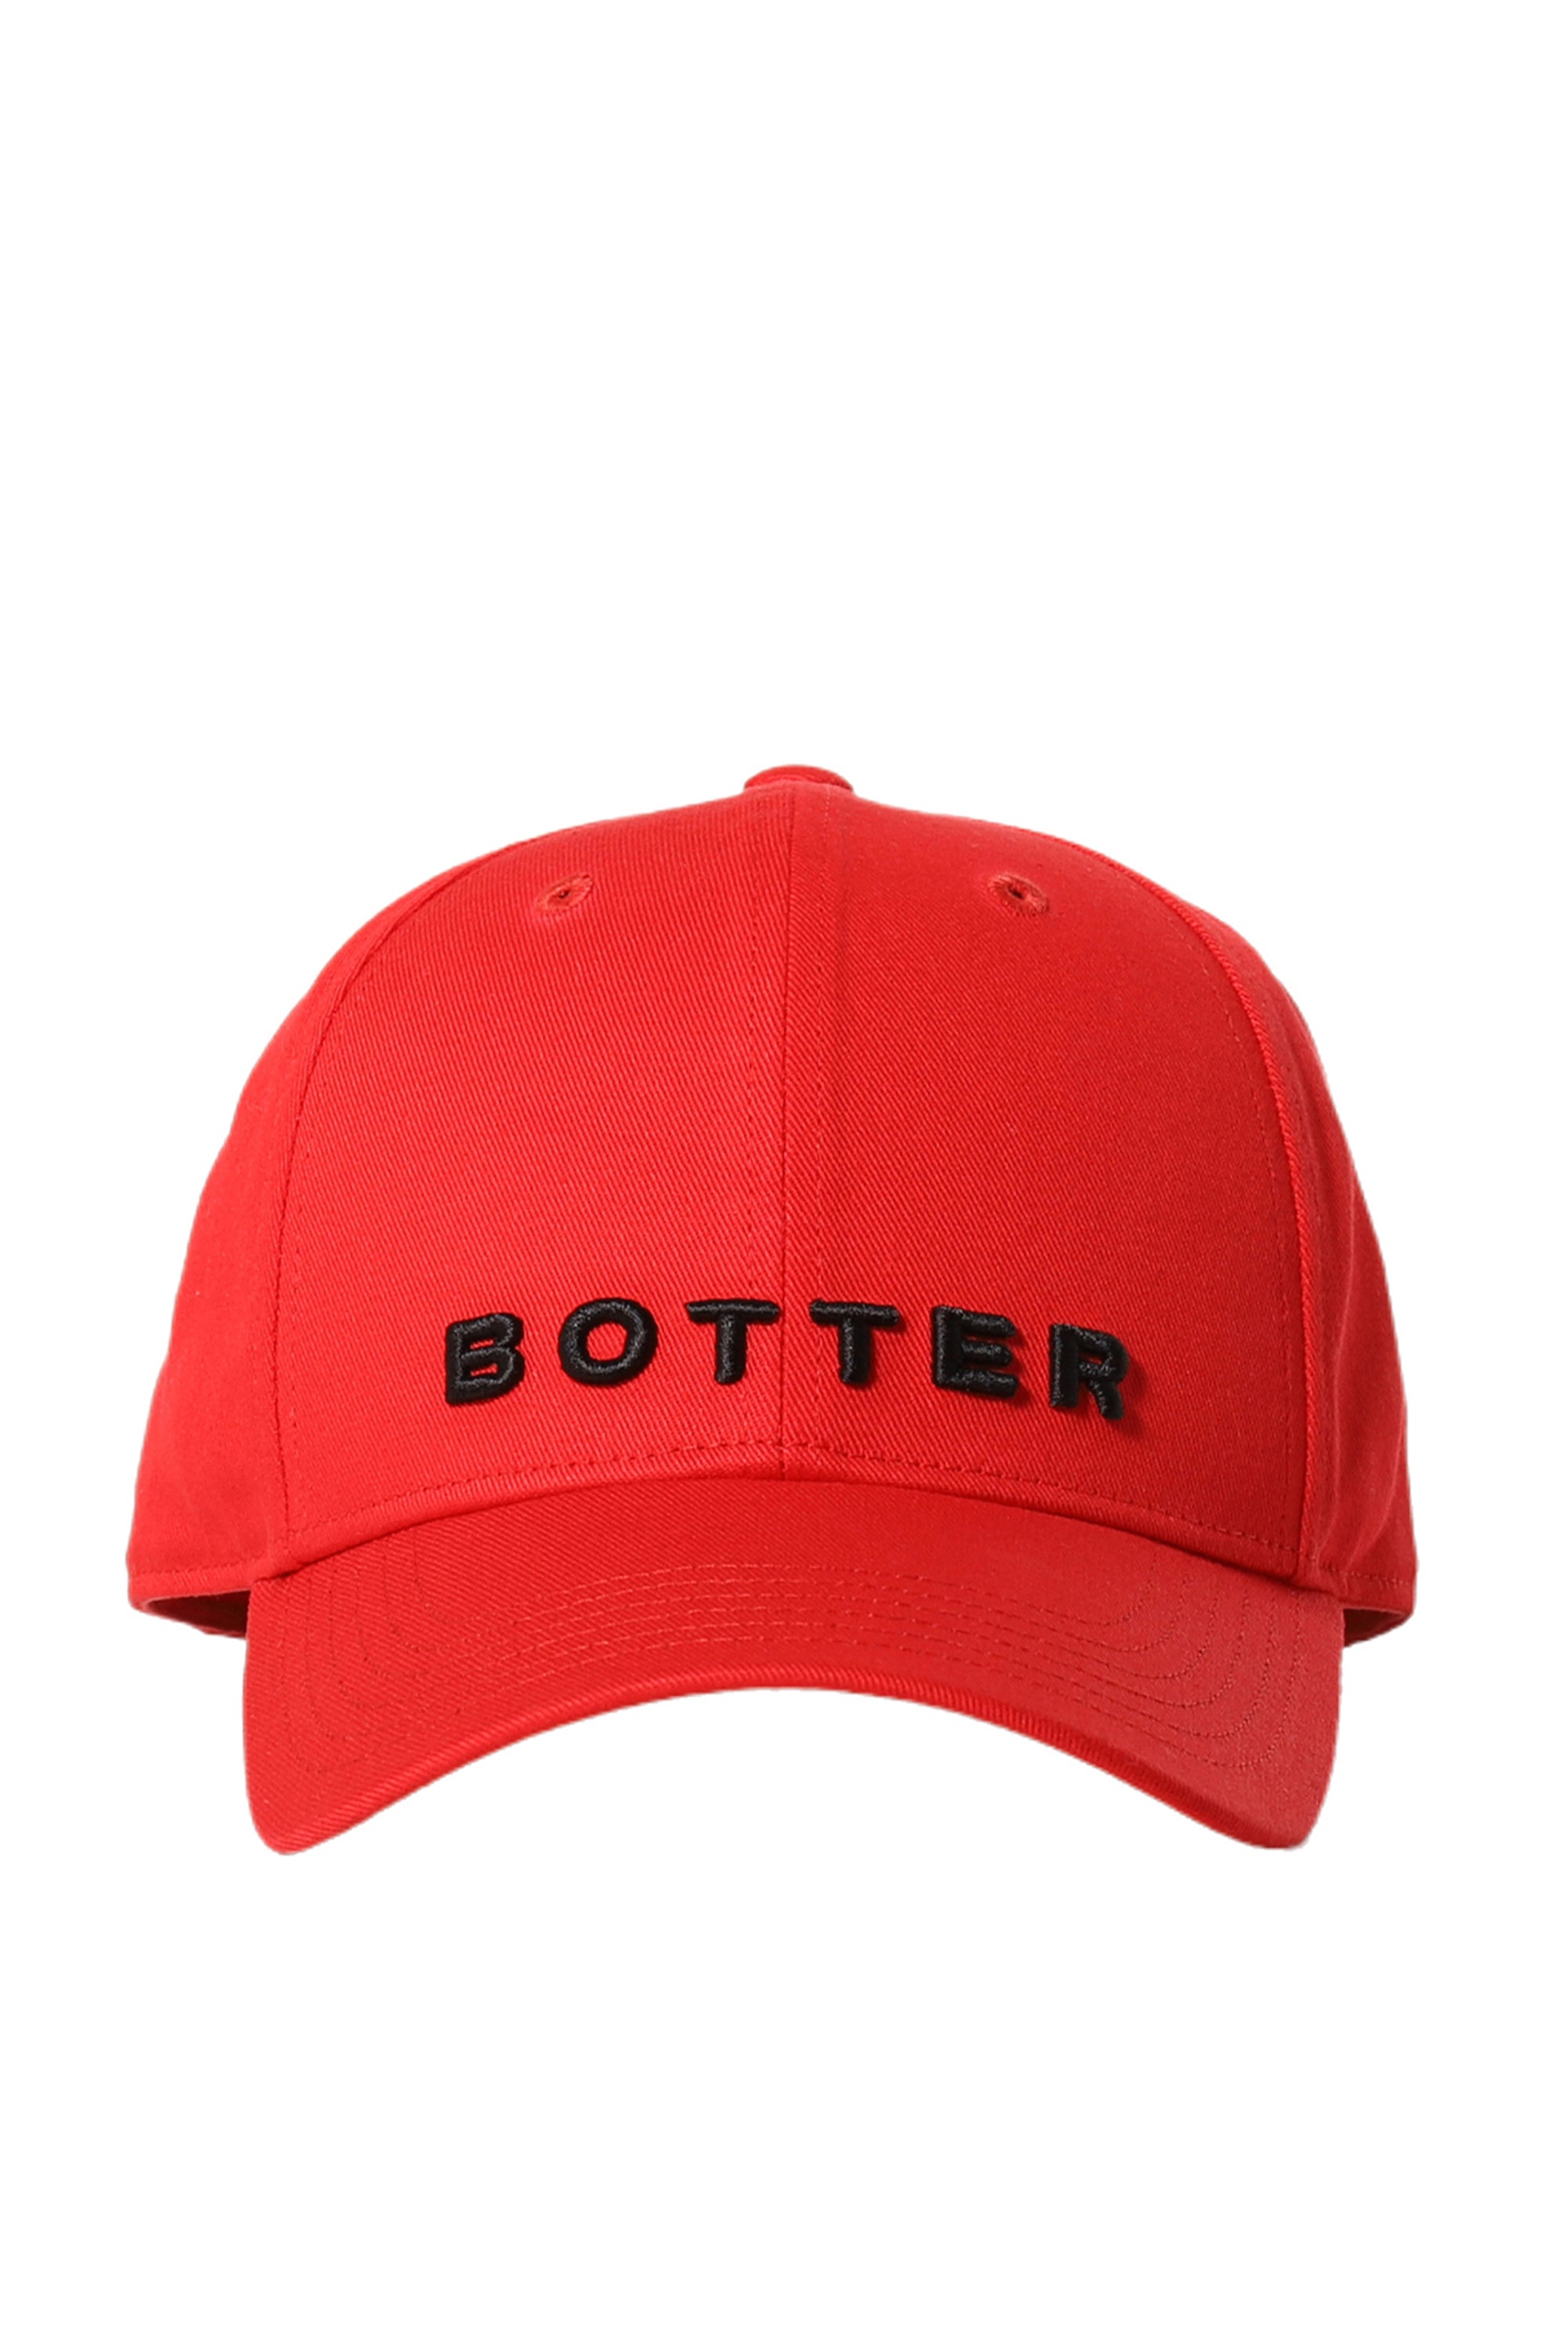 BOTTER ボッター SS24 CLASSIC CAP / RED - NUBIAN